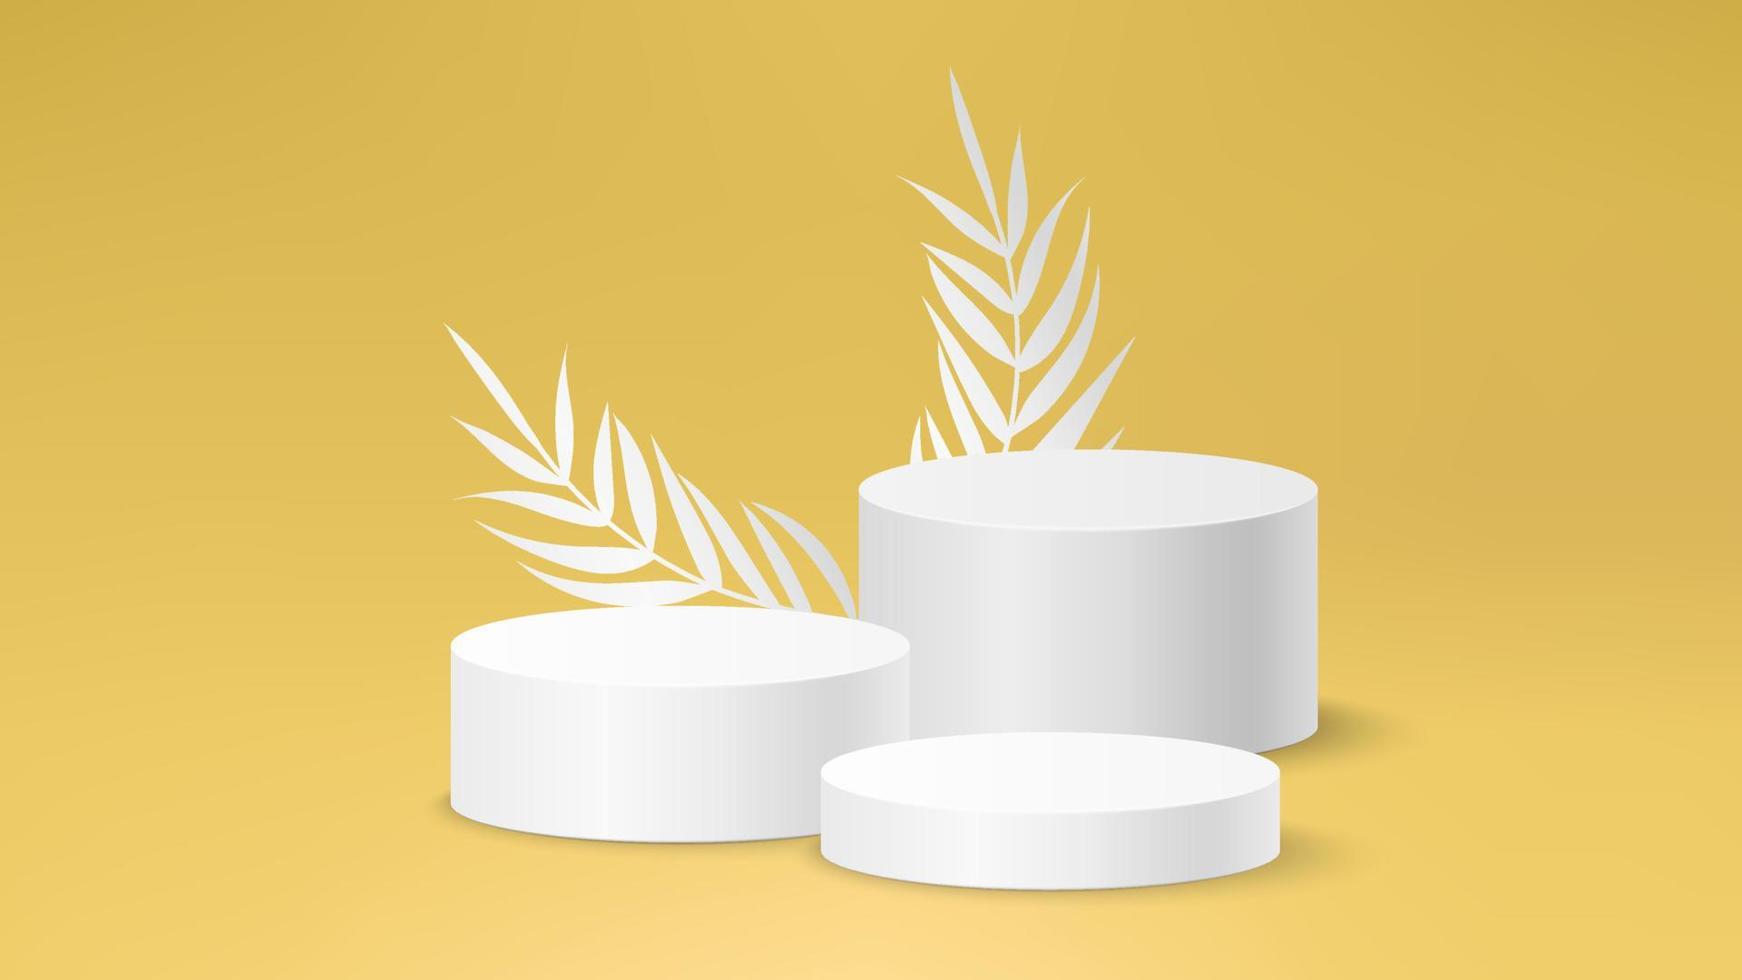 White and yellow 3d background product display podium scene with leaf geometric platform. Stand to show cosmetic product. Realistic paper leaves stage showcase on pedestal display pastel backdrop. vector